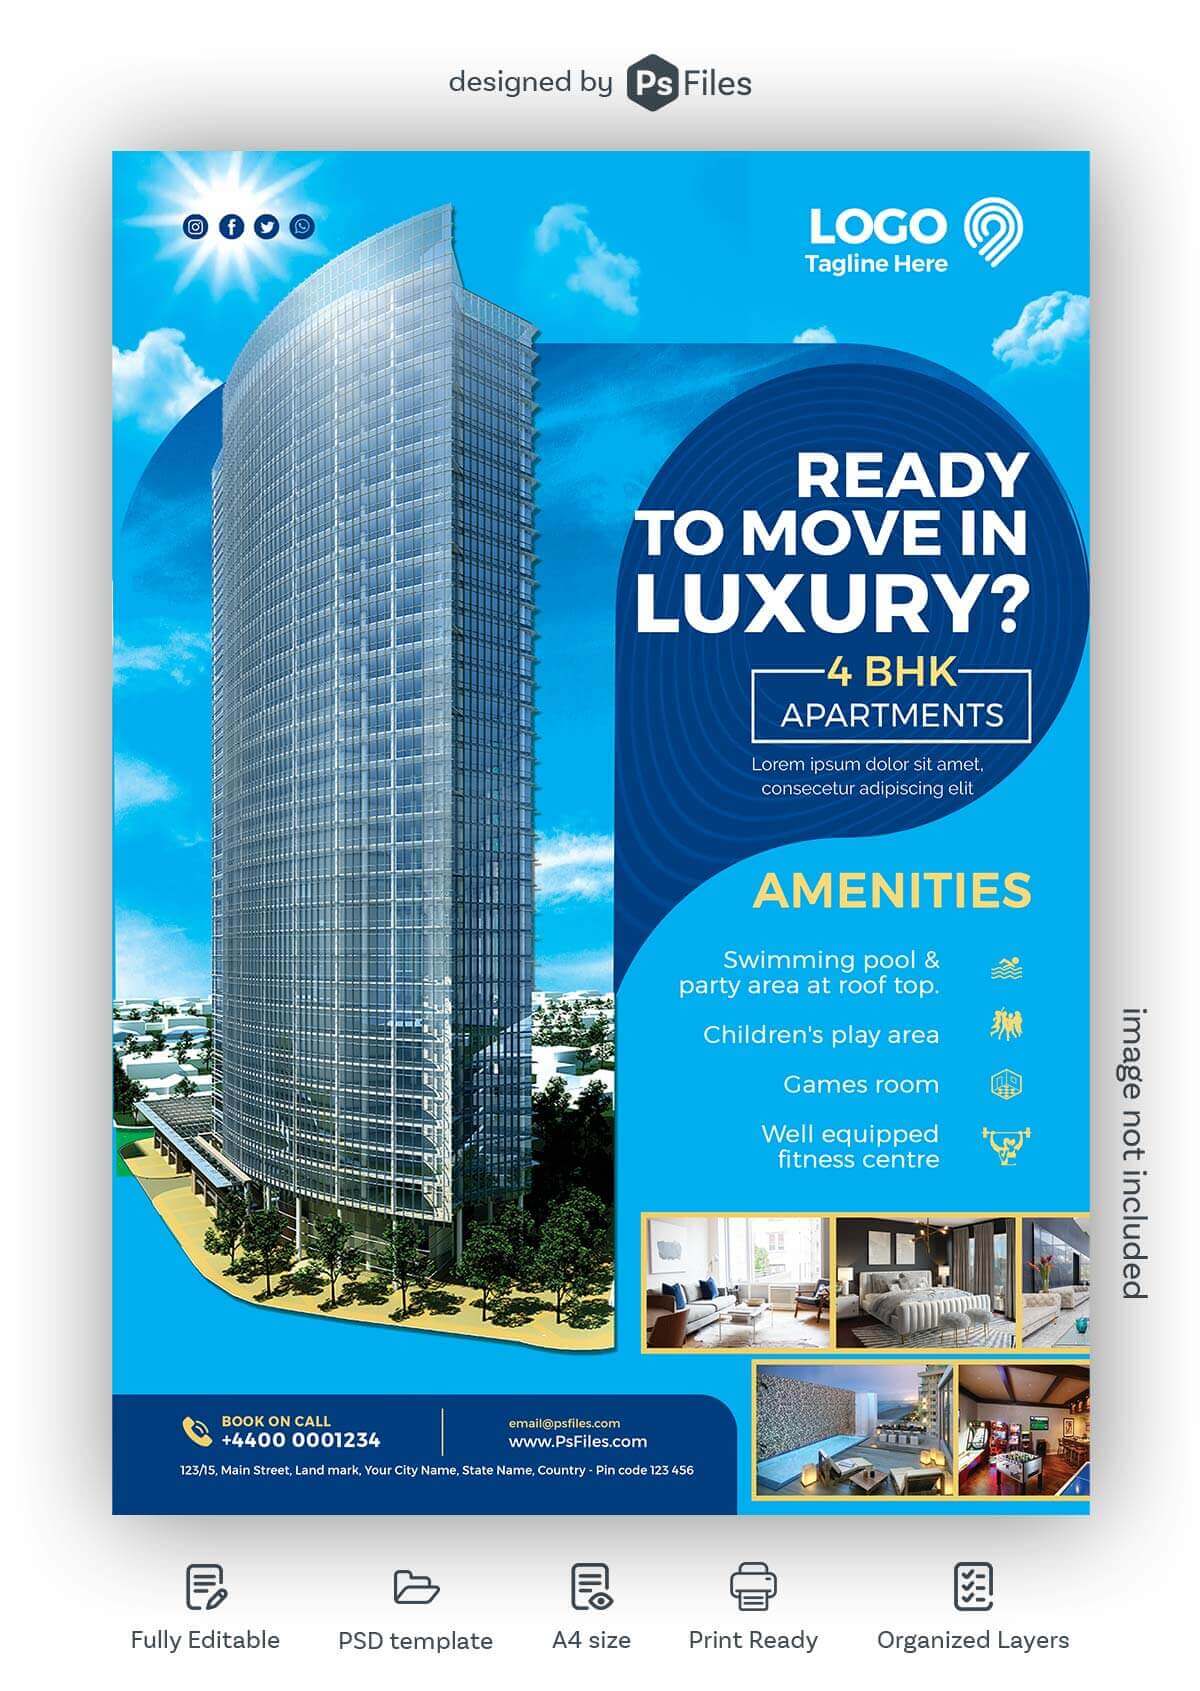 PsFiles Real Estate Marketing Skyscraper Building Living Apartment Flyer PSD Template Free Download